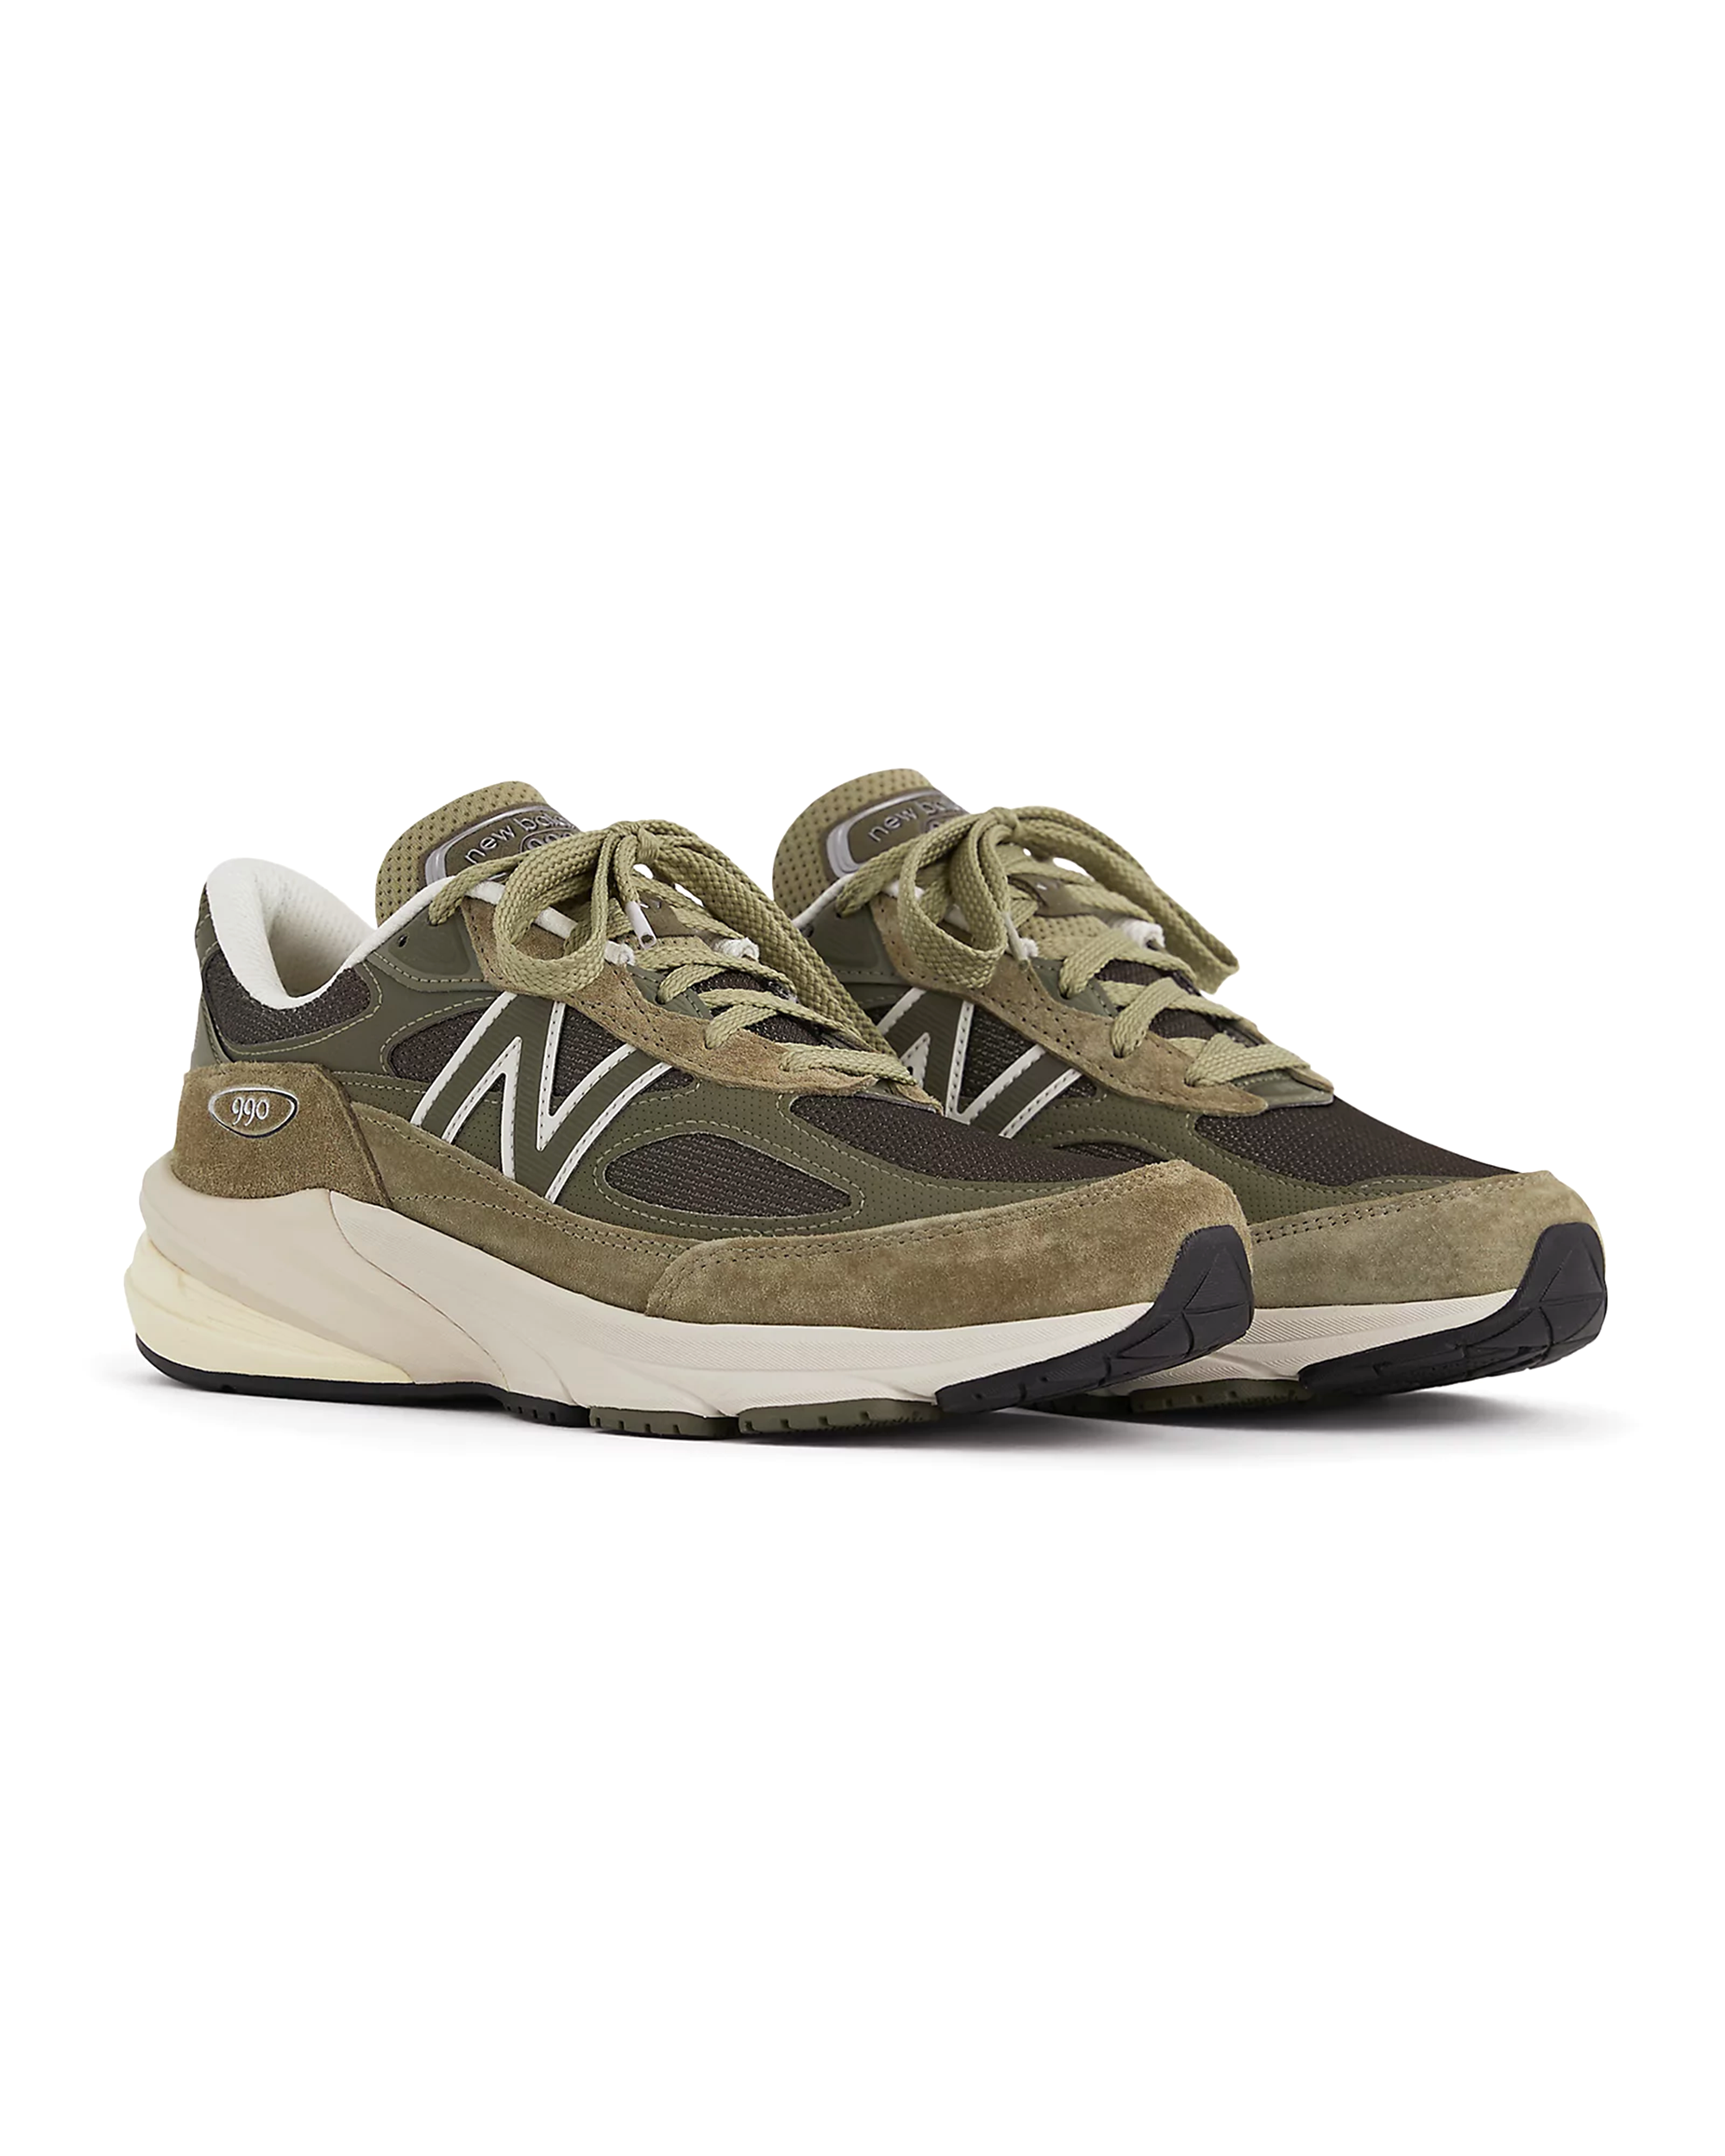 Made in USA 990v6 - True Camo / Muted Olive